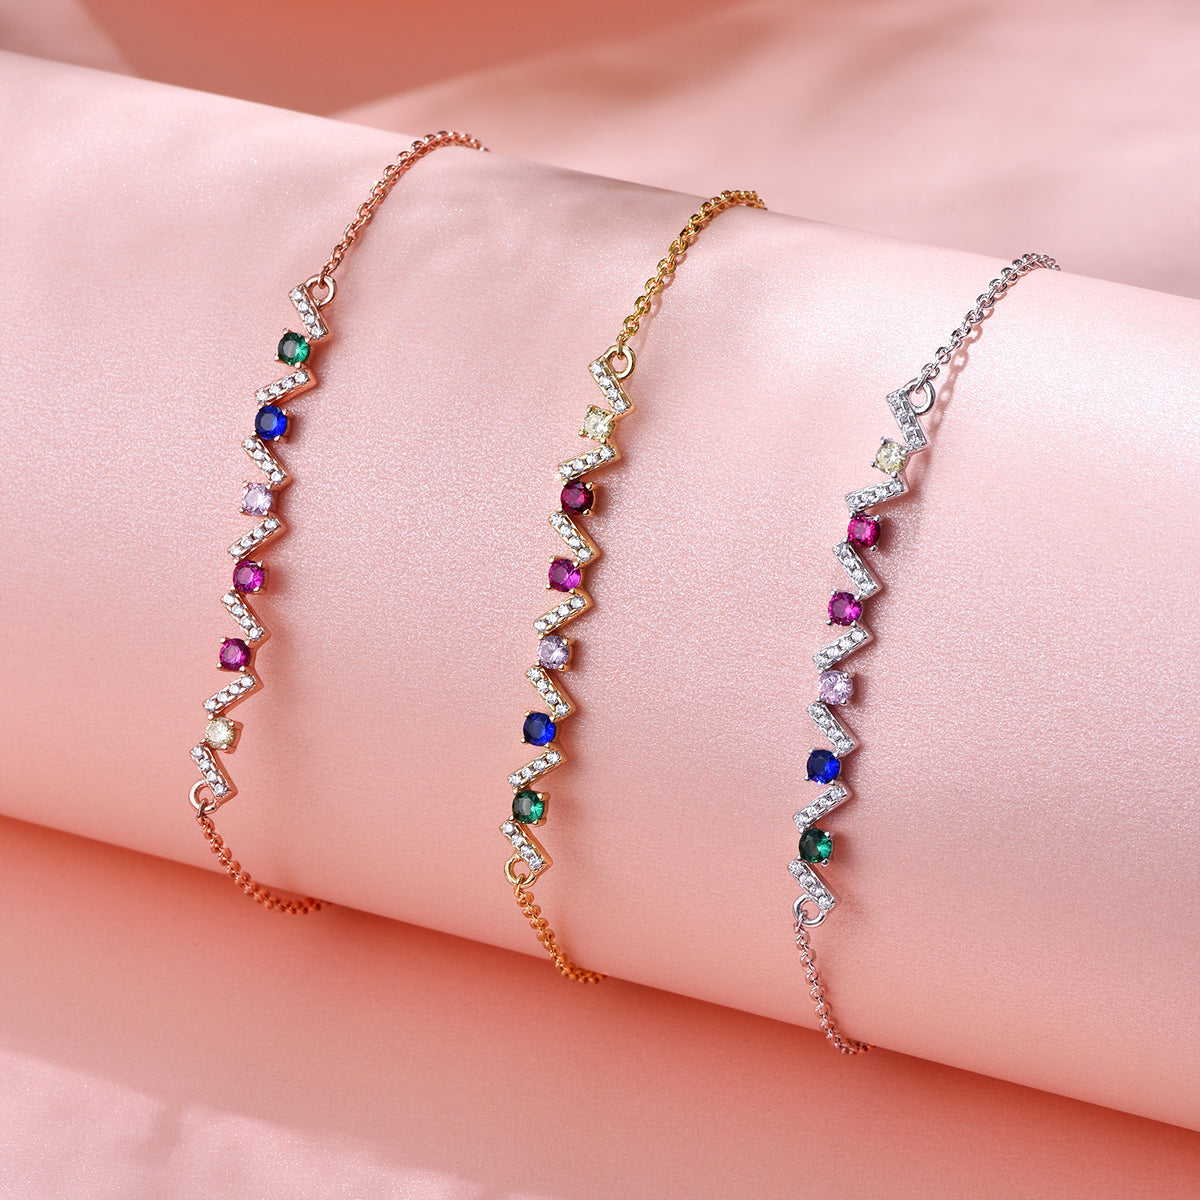 Dissoo® Rainbow Wave Bracelet in 14K Yellow/Rose Gold Vermeil,and Sterling Silver